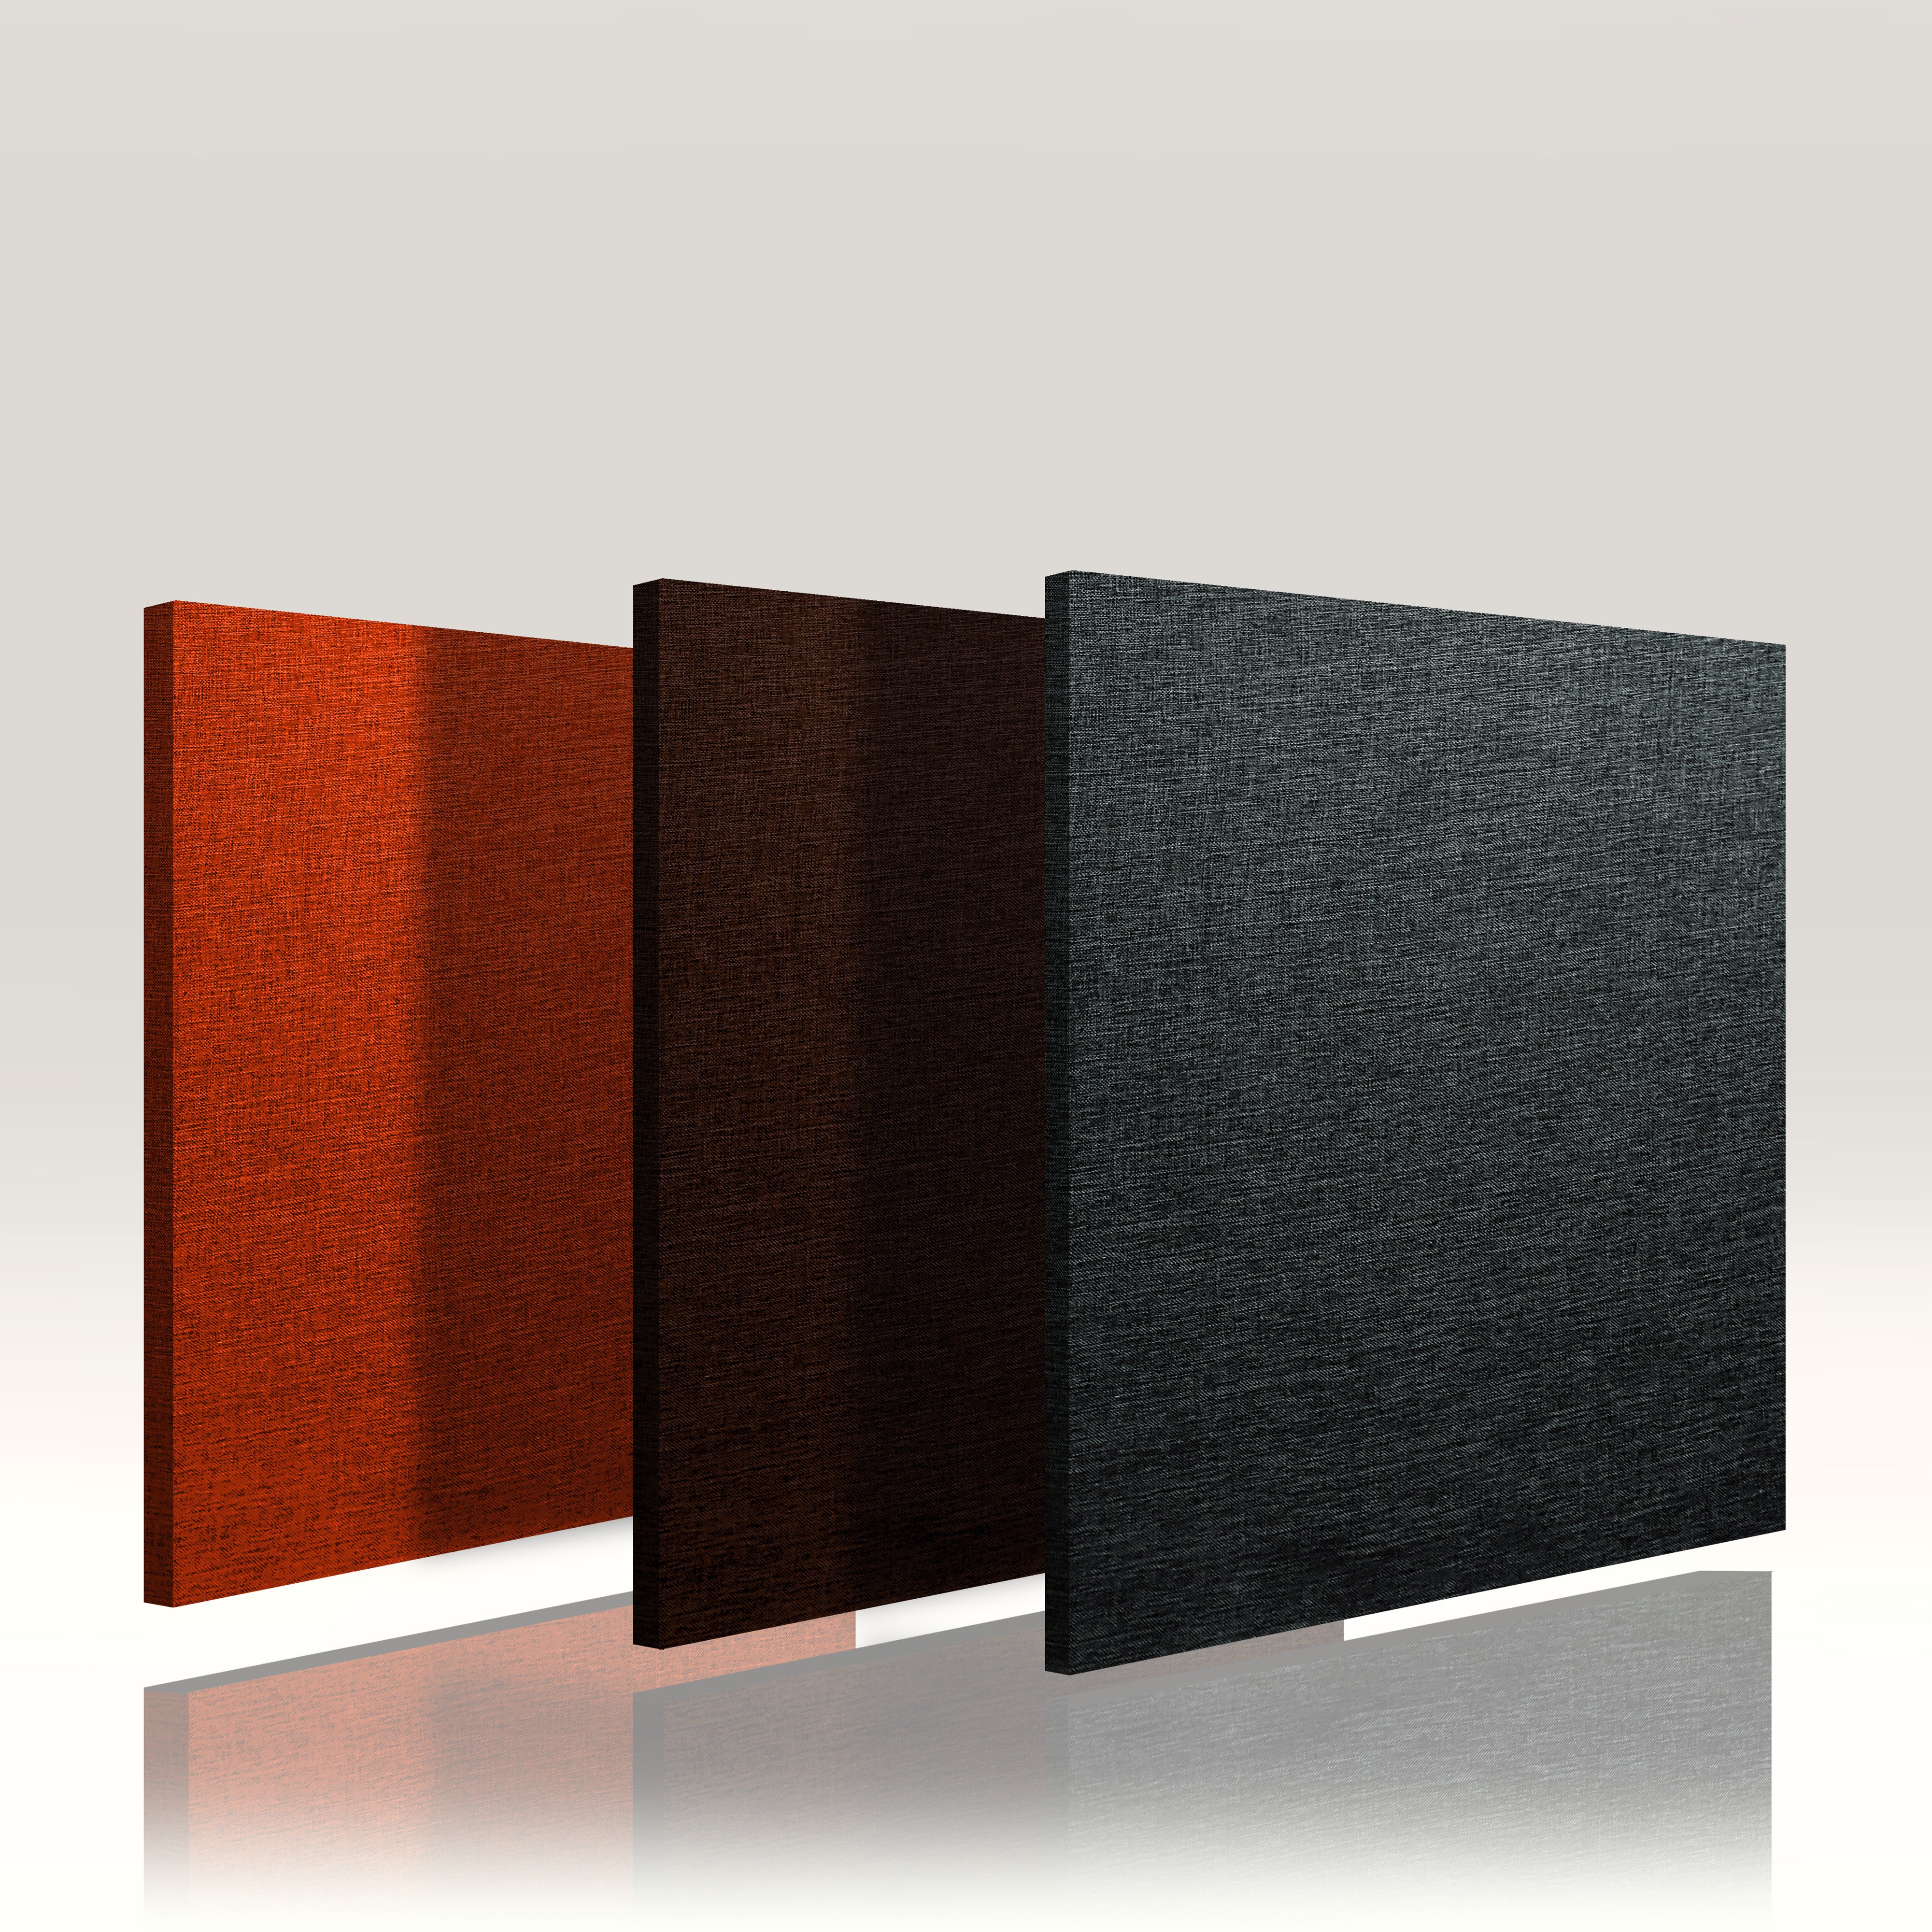 Acoustic Panel for Sound Absorption | customizable sizes from 12 